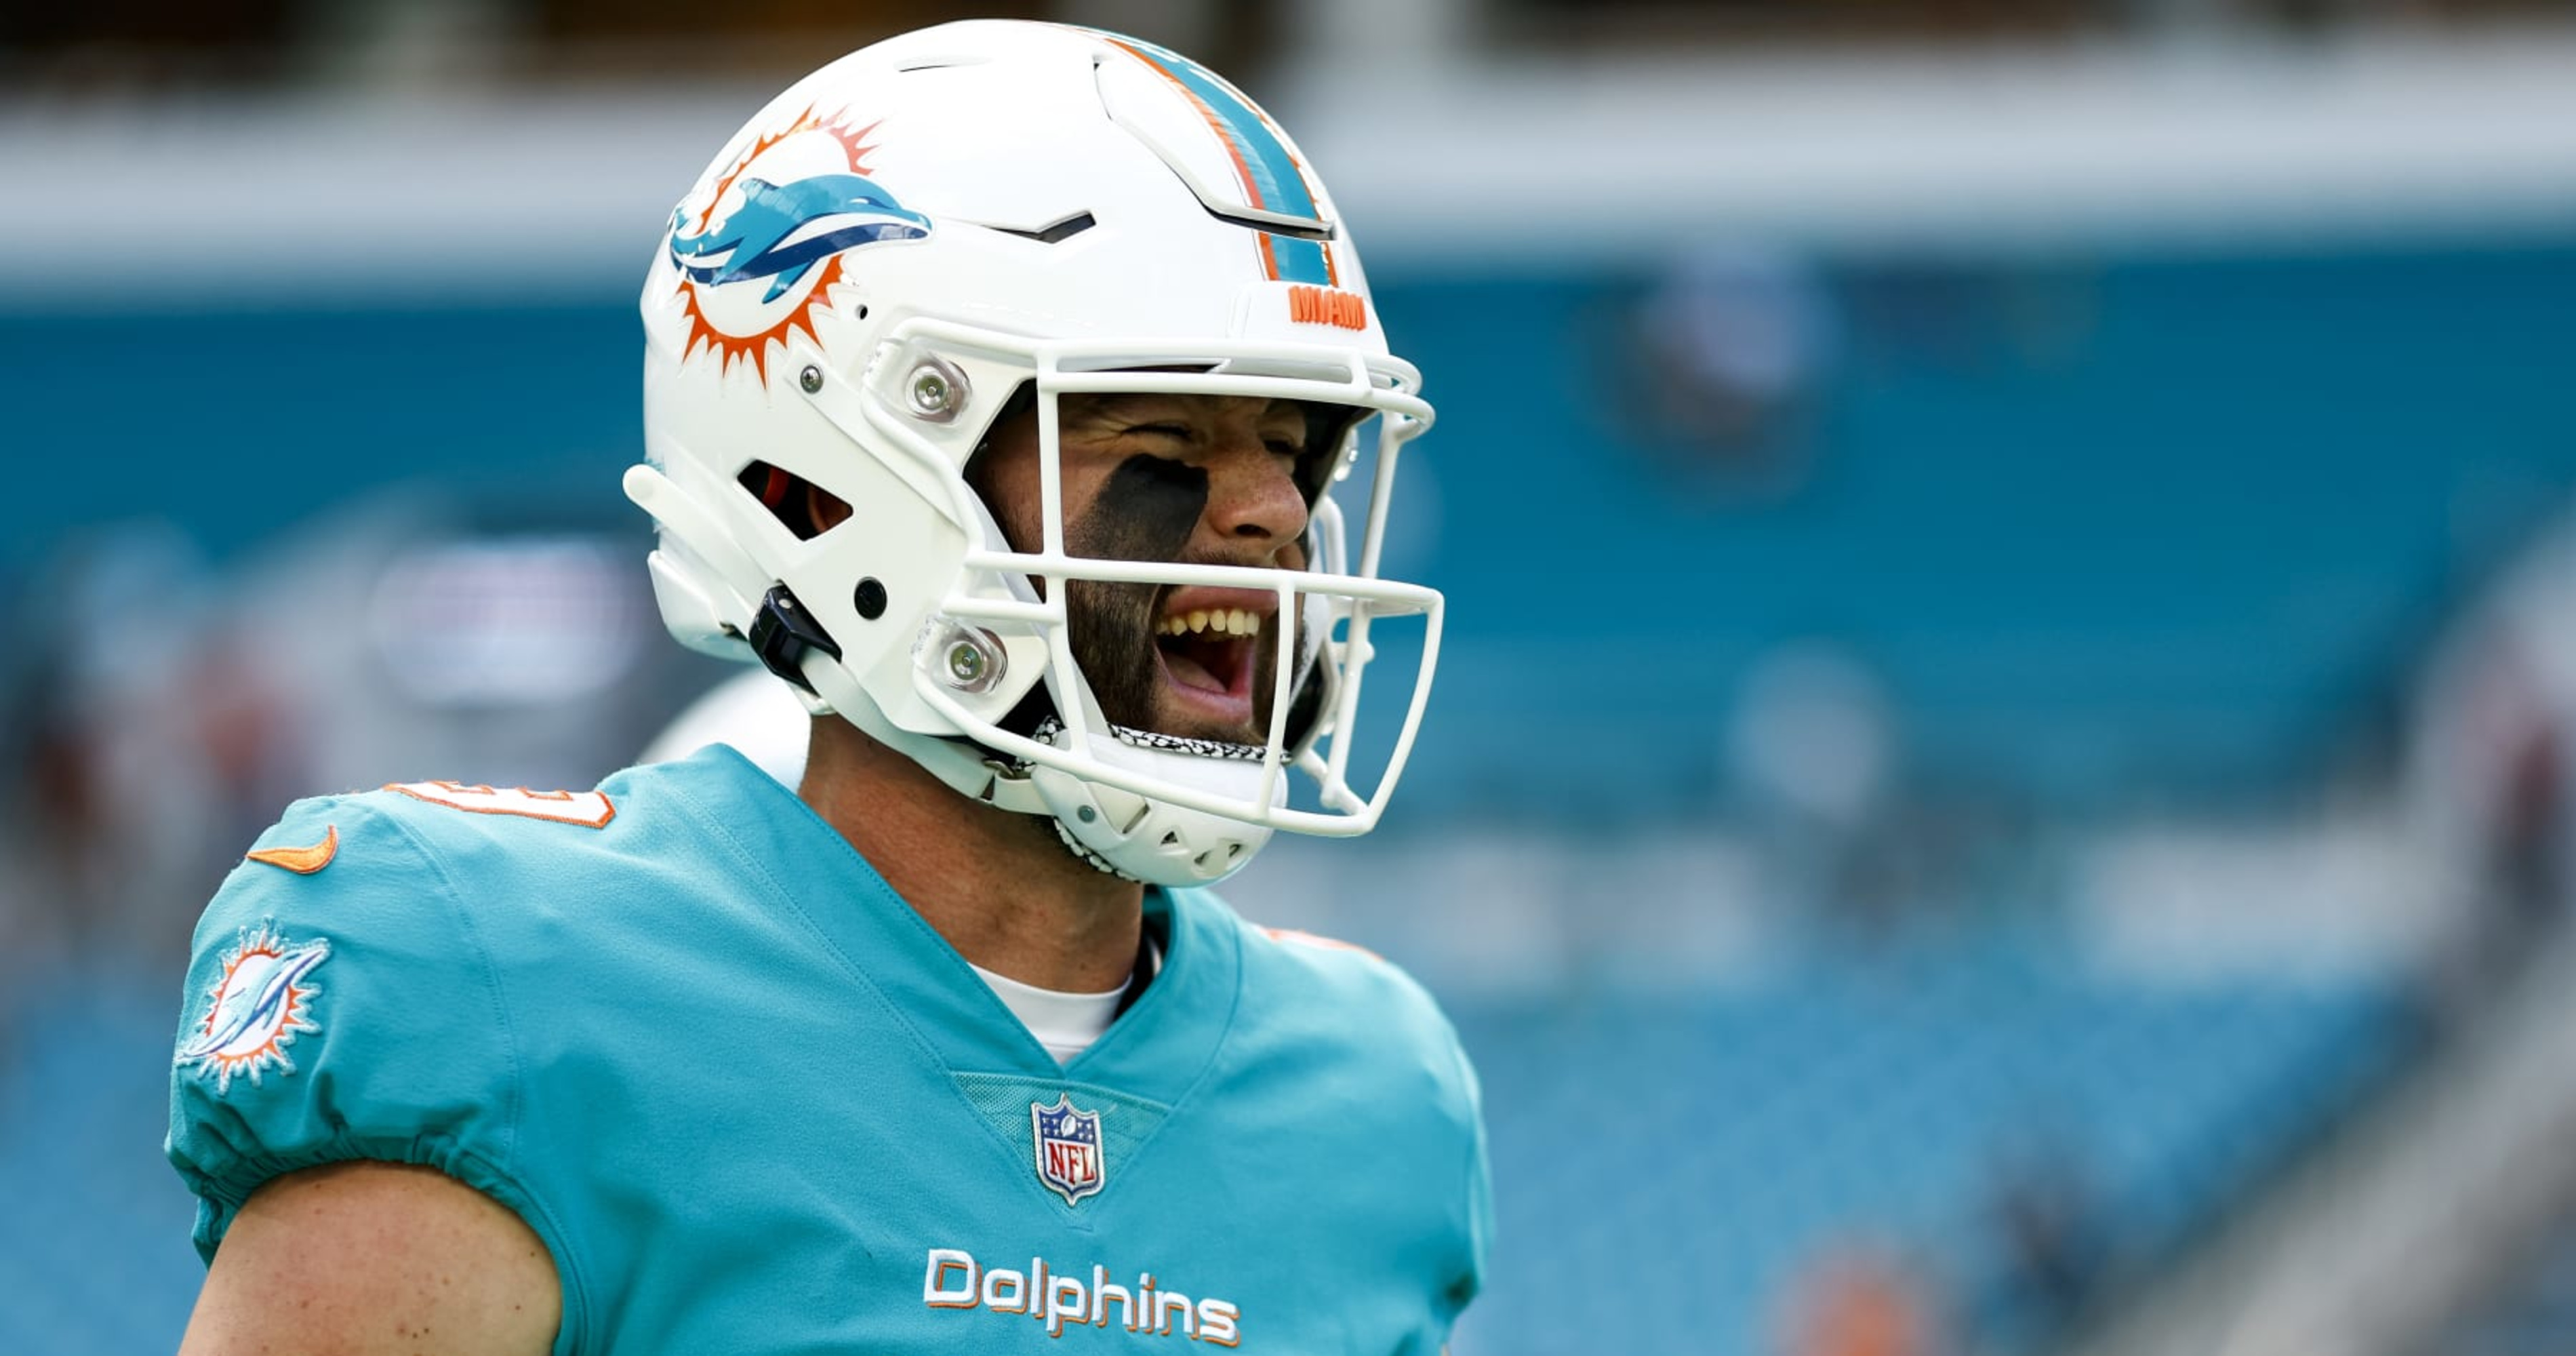 Dolphins beat Jets, get assist to clinch NFL playoff berth